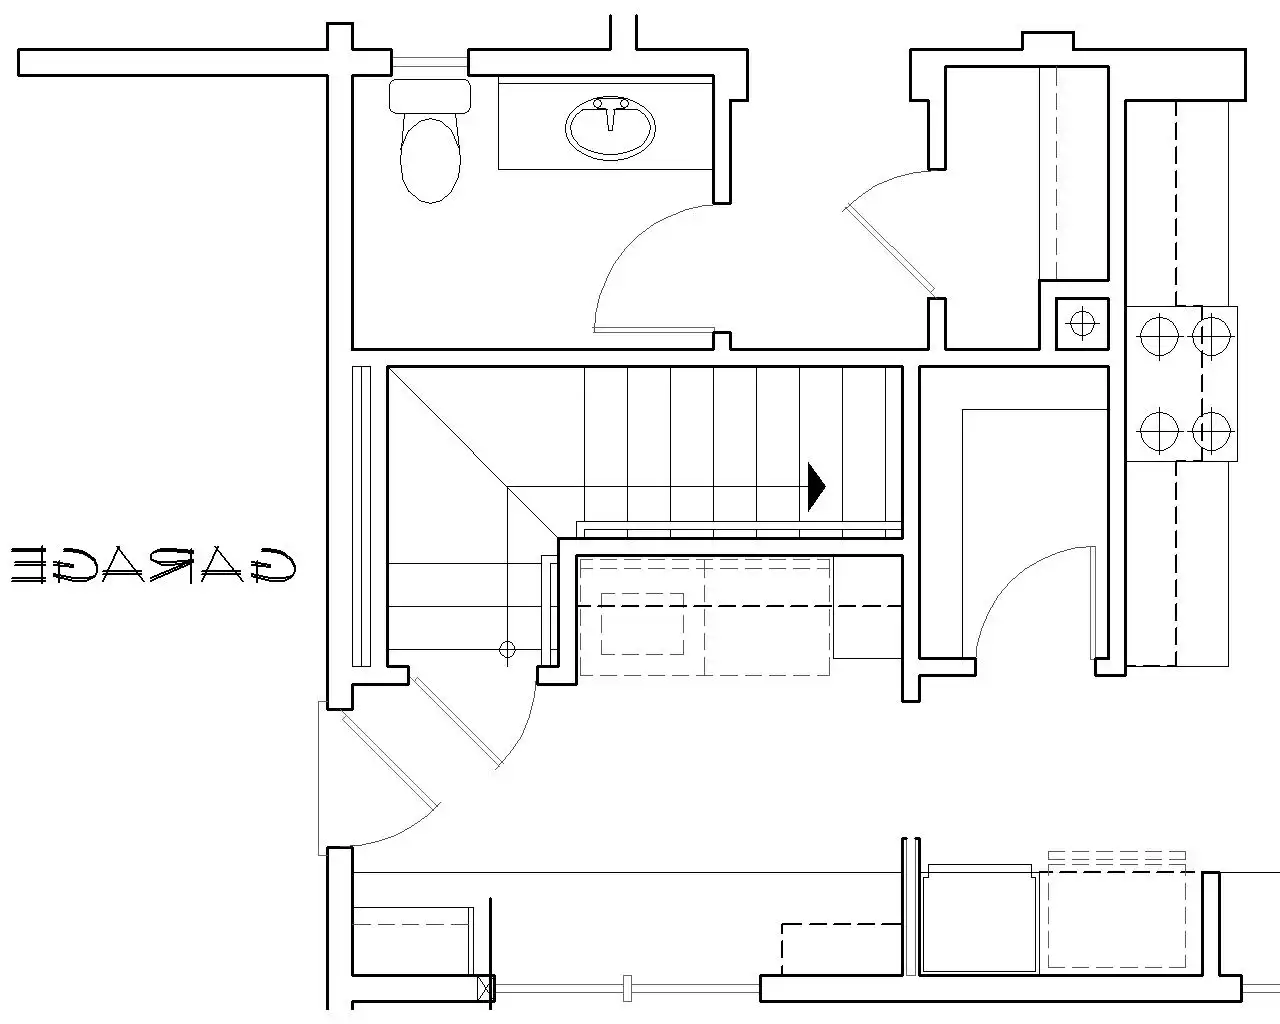 Stair Location for Basement Version